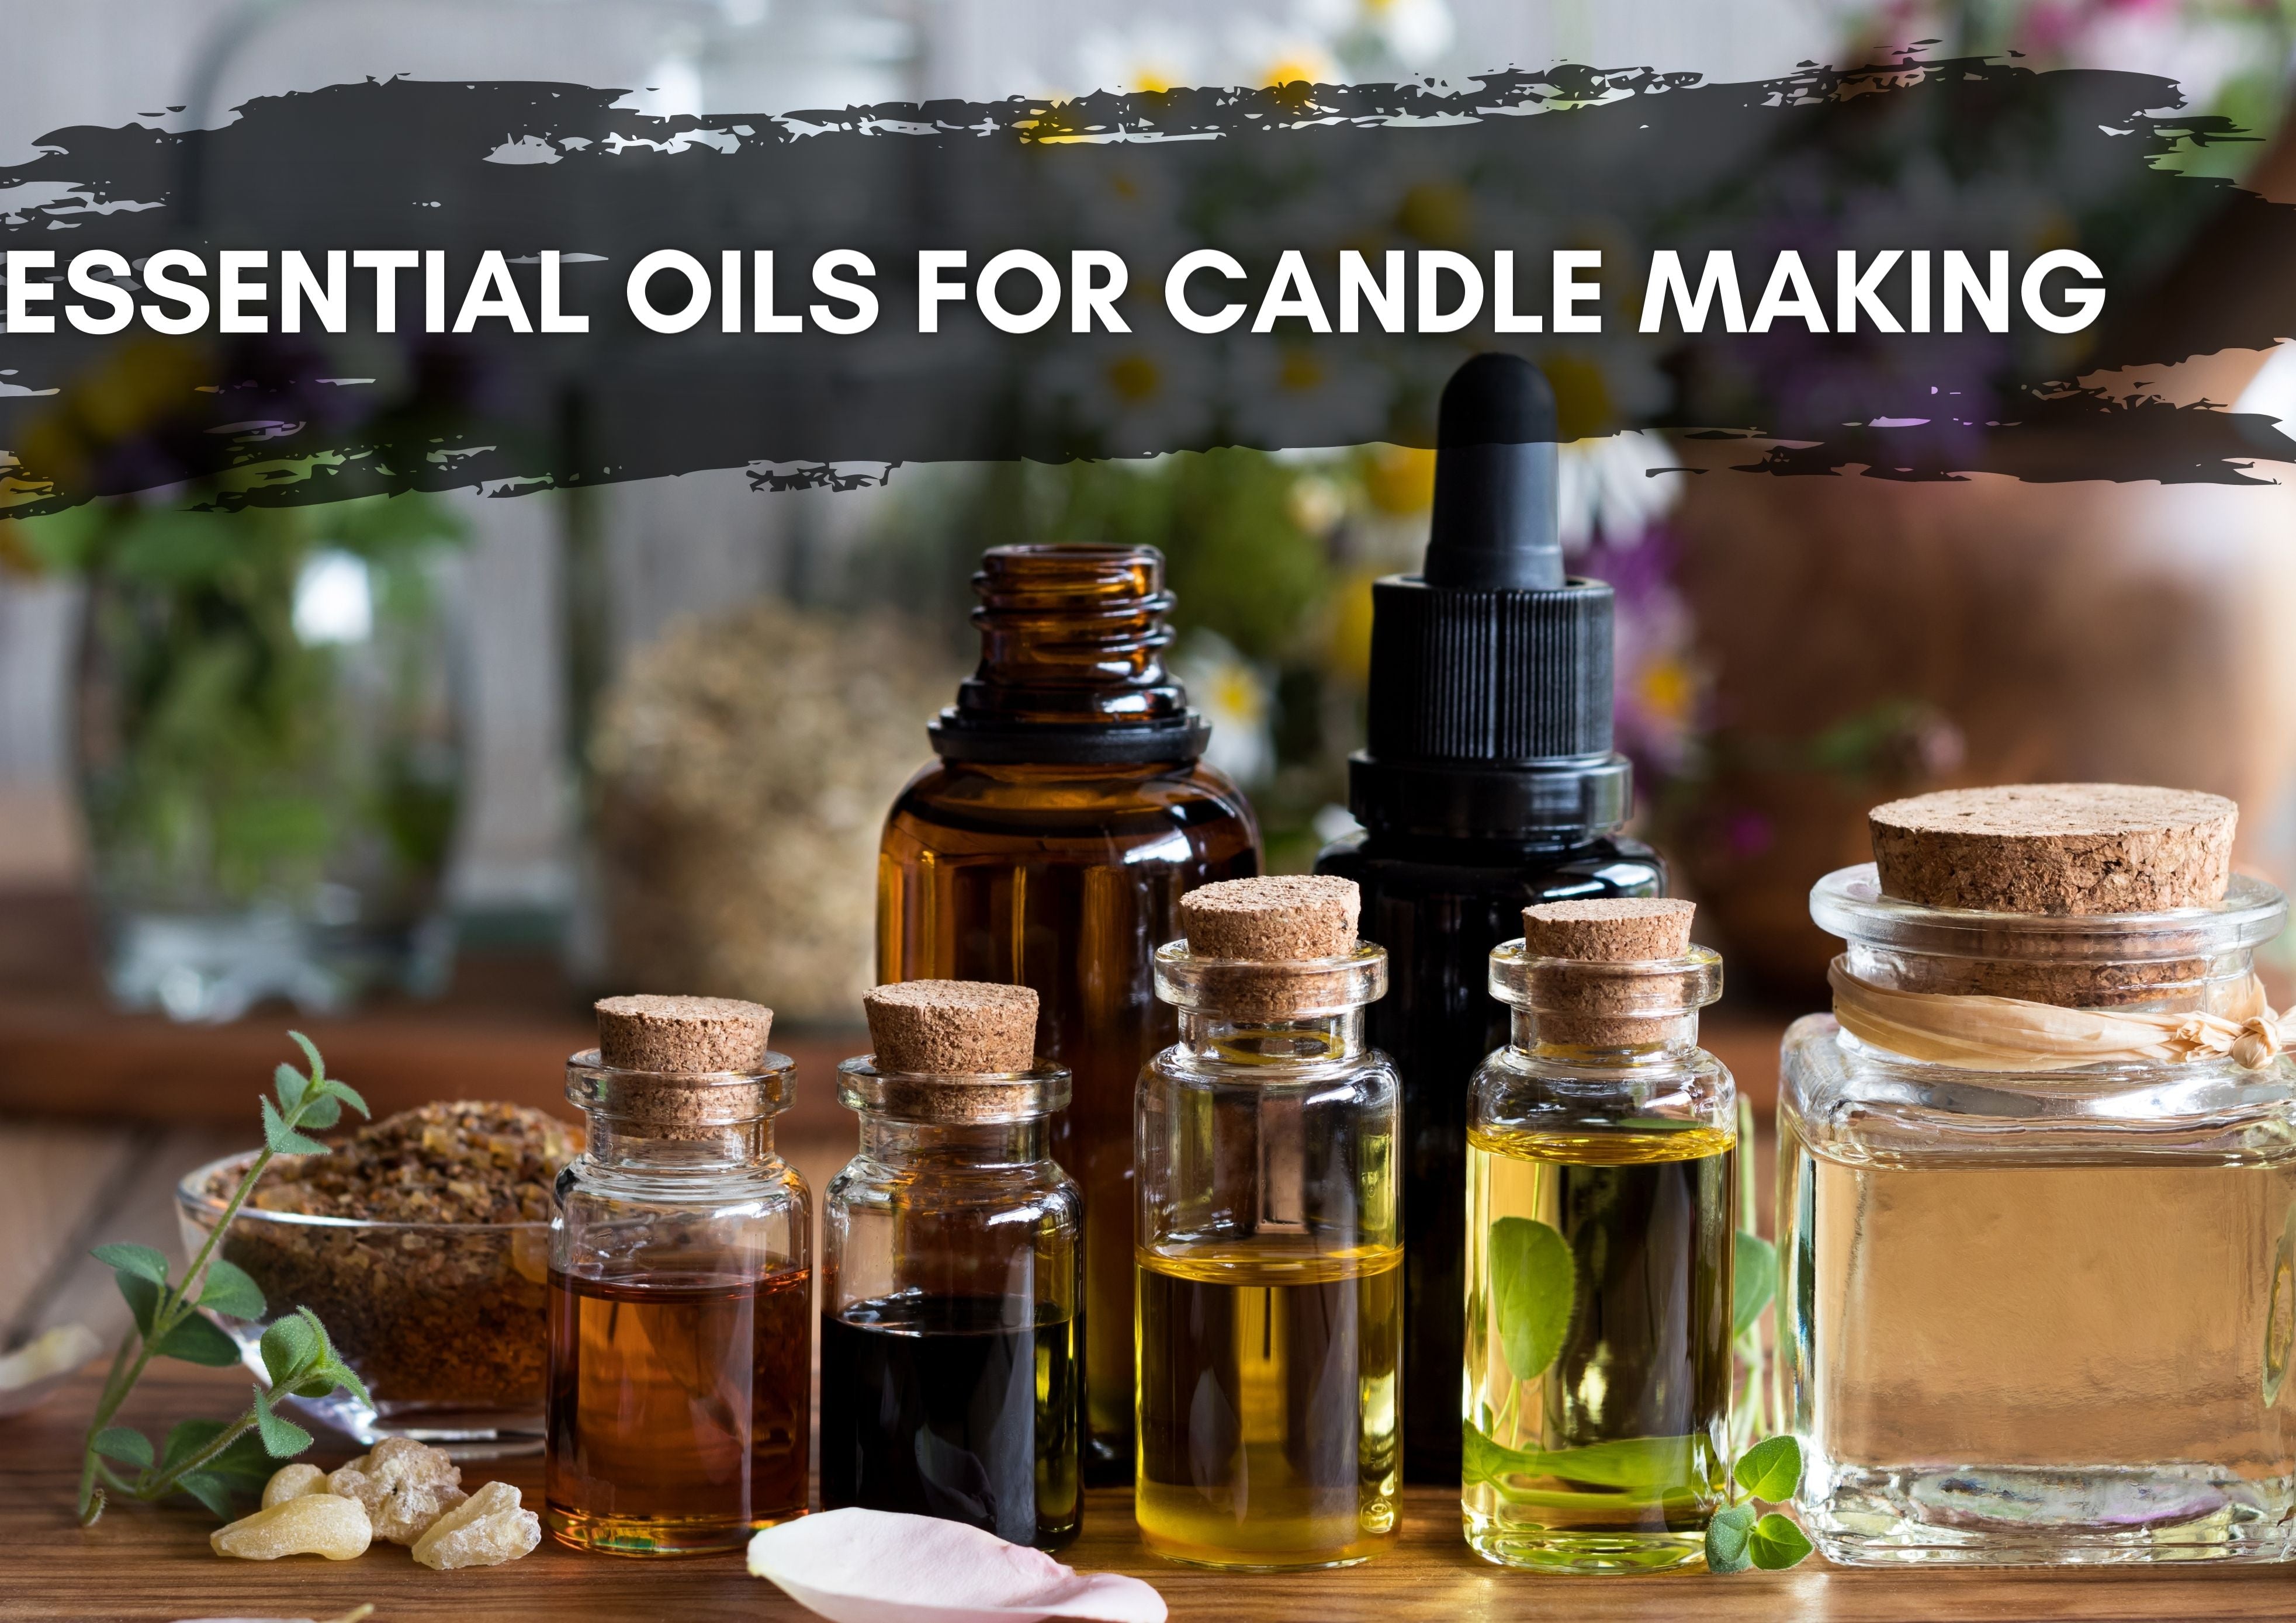 10 Best Essential Oils for Candle Making - Realism Kandles